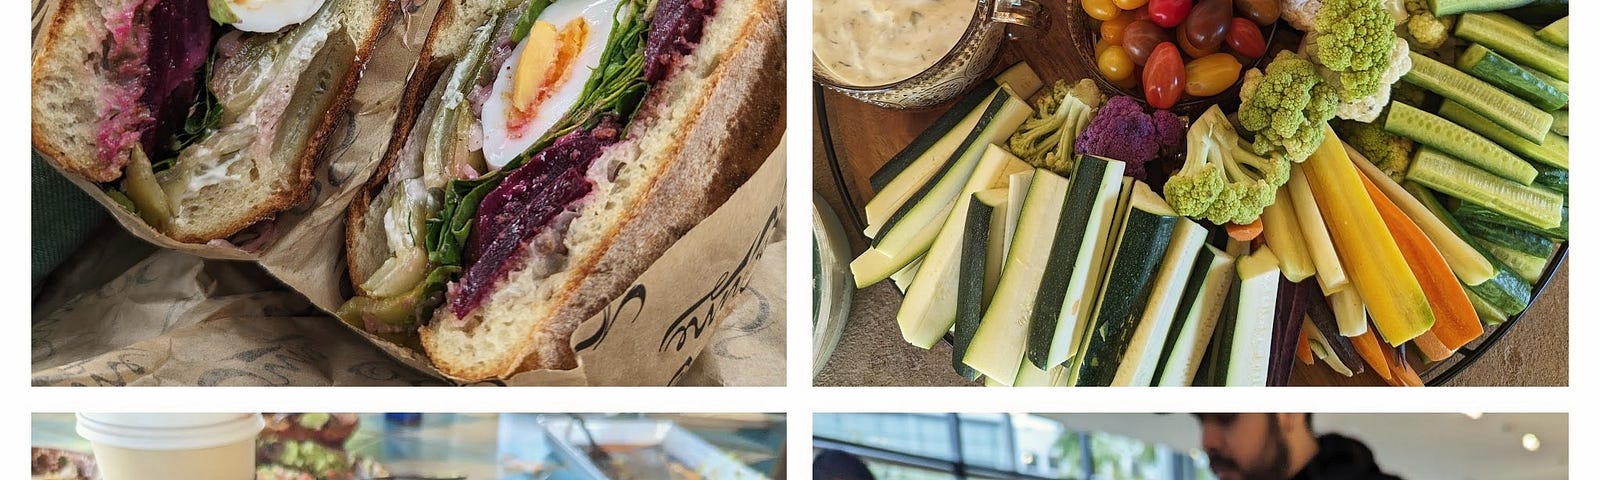 a grid of four food images. top left is a beet and egg sandwich, top right is a vegetable crudite platter, bottom left is two margaritas on a table, and bottom right is three smoothies from Erewhon